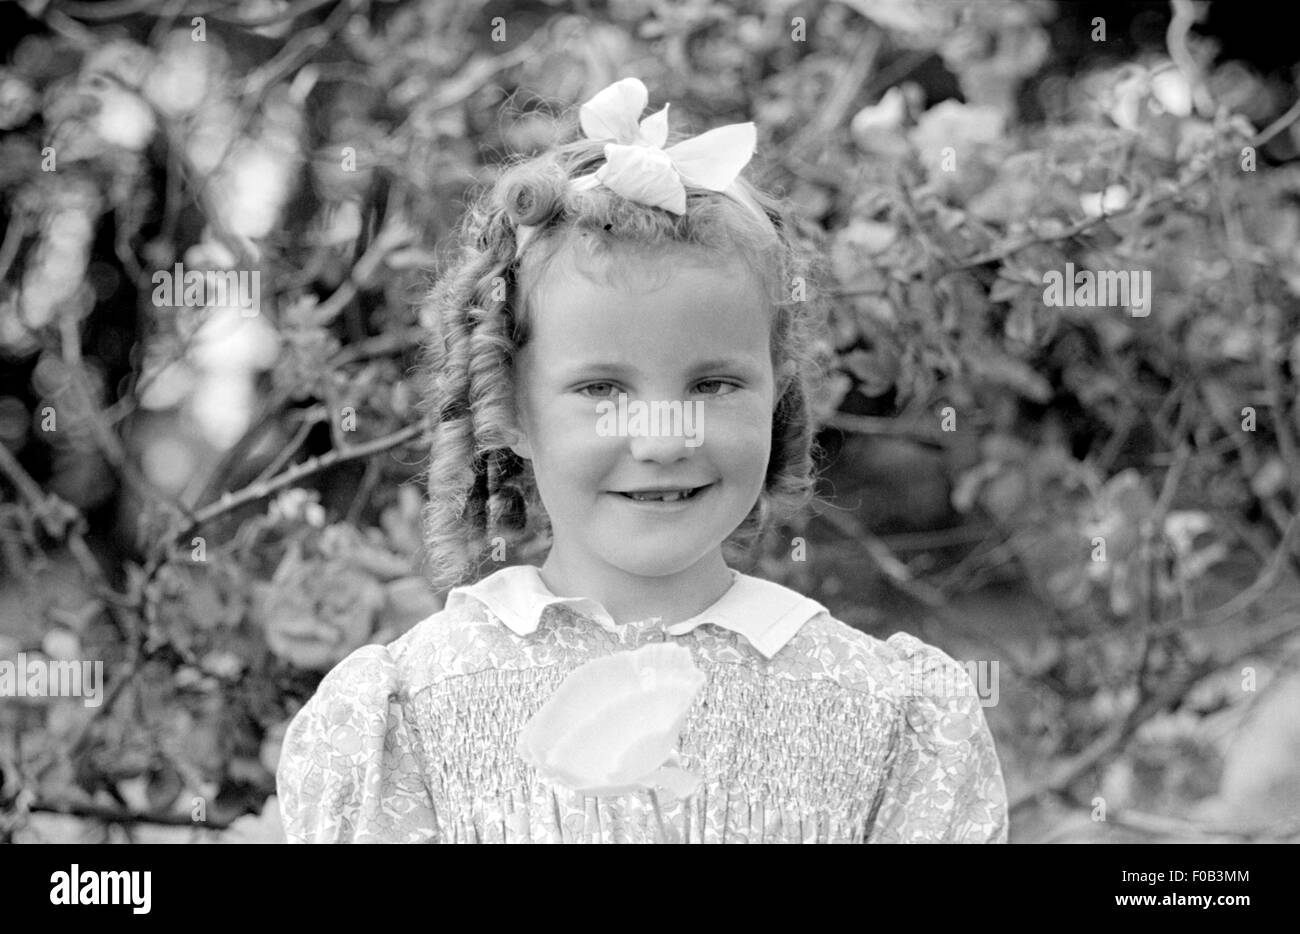 Portrait of a young girl Stock Photo